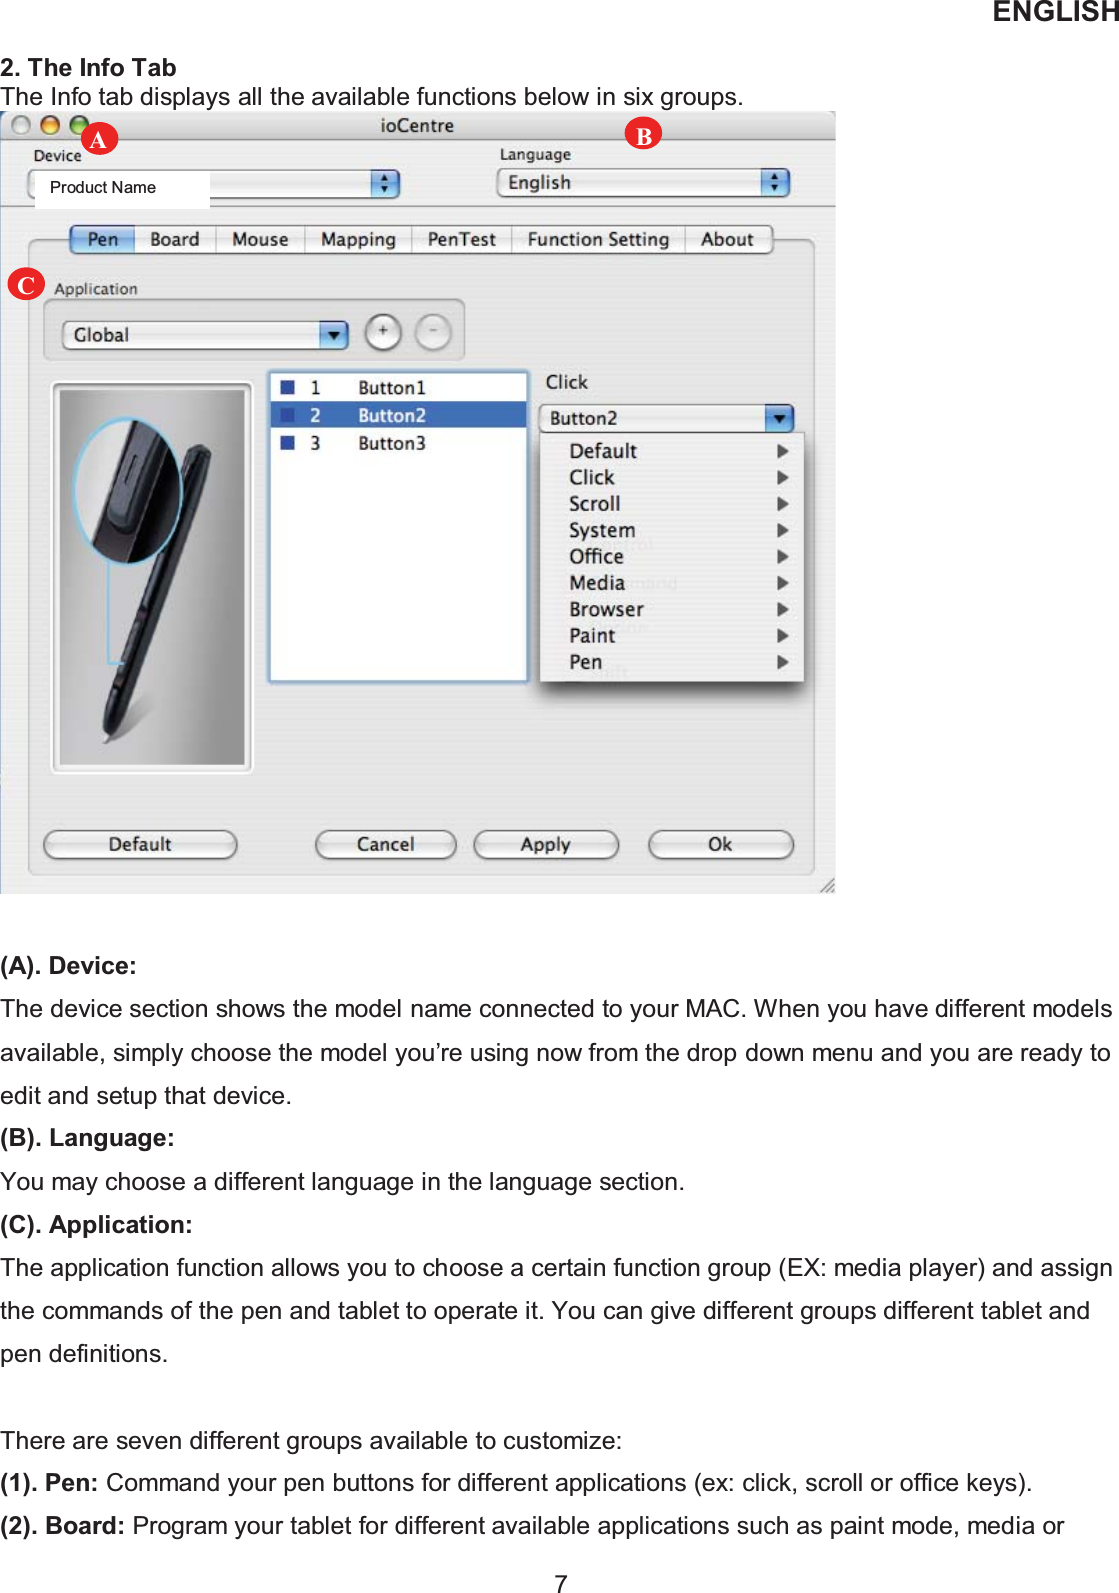 ENGLISH  7 2. The Info Tab The Info tab displays all the available functions below in six groups.    (A). Device: The device section shows the model name connected to your MAC. When you have different models available, simply choose the model you’re using now from the drop down menu and you are ready to edit and setup that device. (B). Language: You may choose a different language in the language section. (C). Application: The application function allows you to choose a certain function group (EX: media player) and assign the commands of the pen and tablet to operate it. You can give different groups different tablet and pen definitions.  There are seven different groups available to customize: (1). Pen: Command your pen buttons for different applications (ex: click, scroll or office keys). (2). Board: Program your tablet for different available applications such as paint mode, media or A   B C  Product Name 